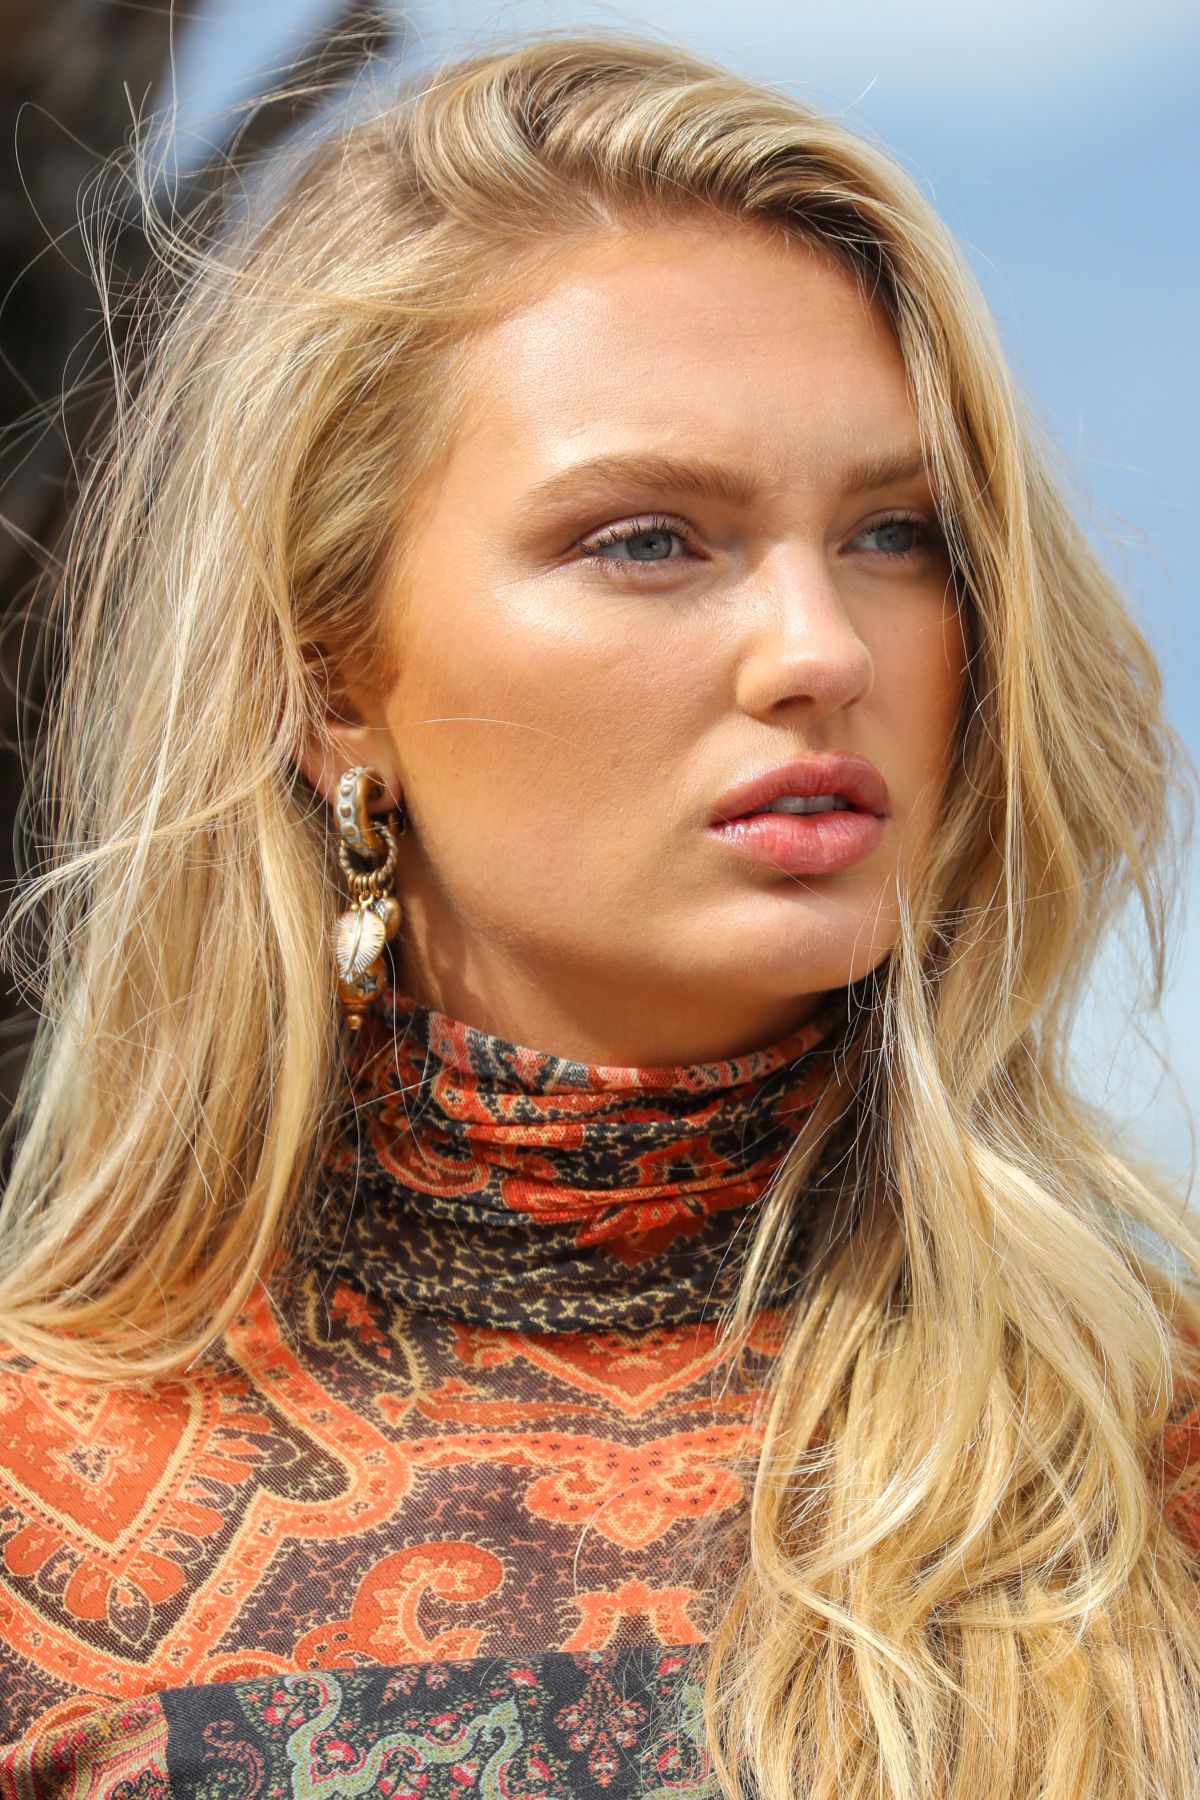 romee-strijd-arrives-at-martinez-hotel-in-cannes-05-15-2019-2.jpg